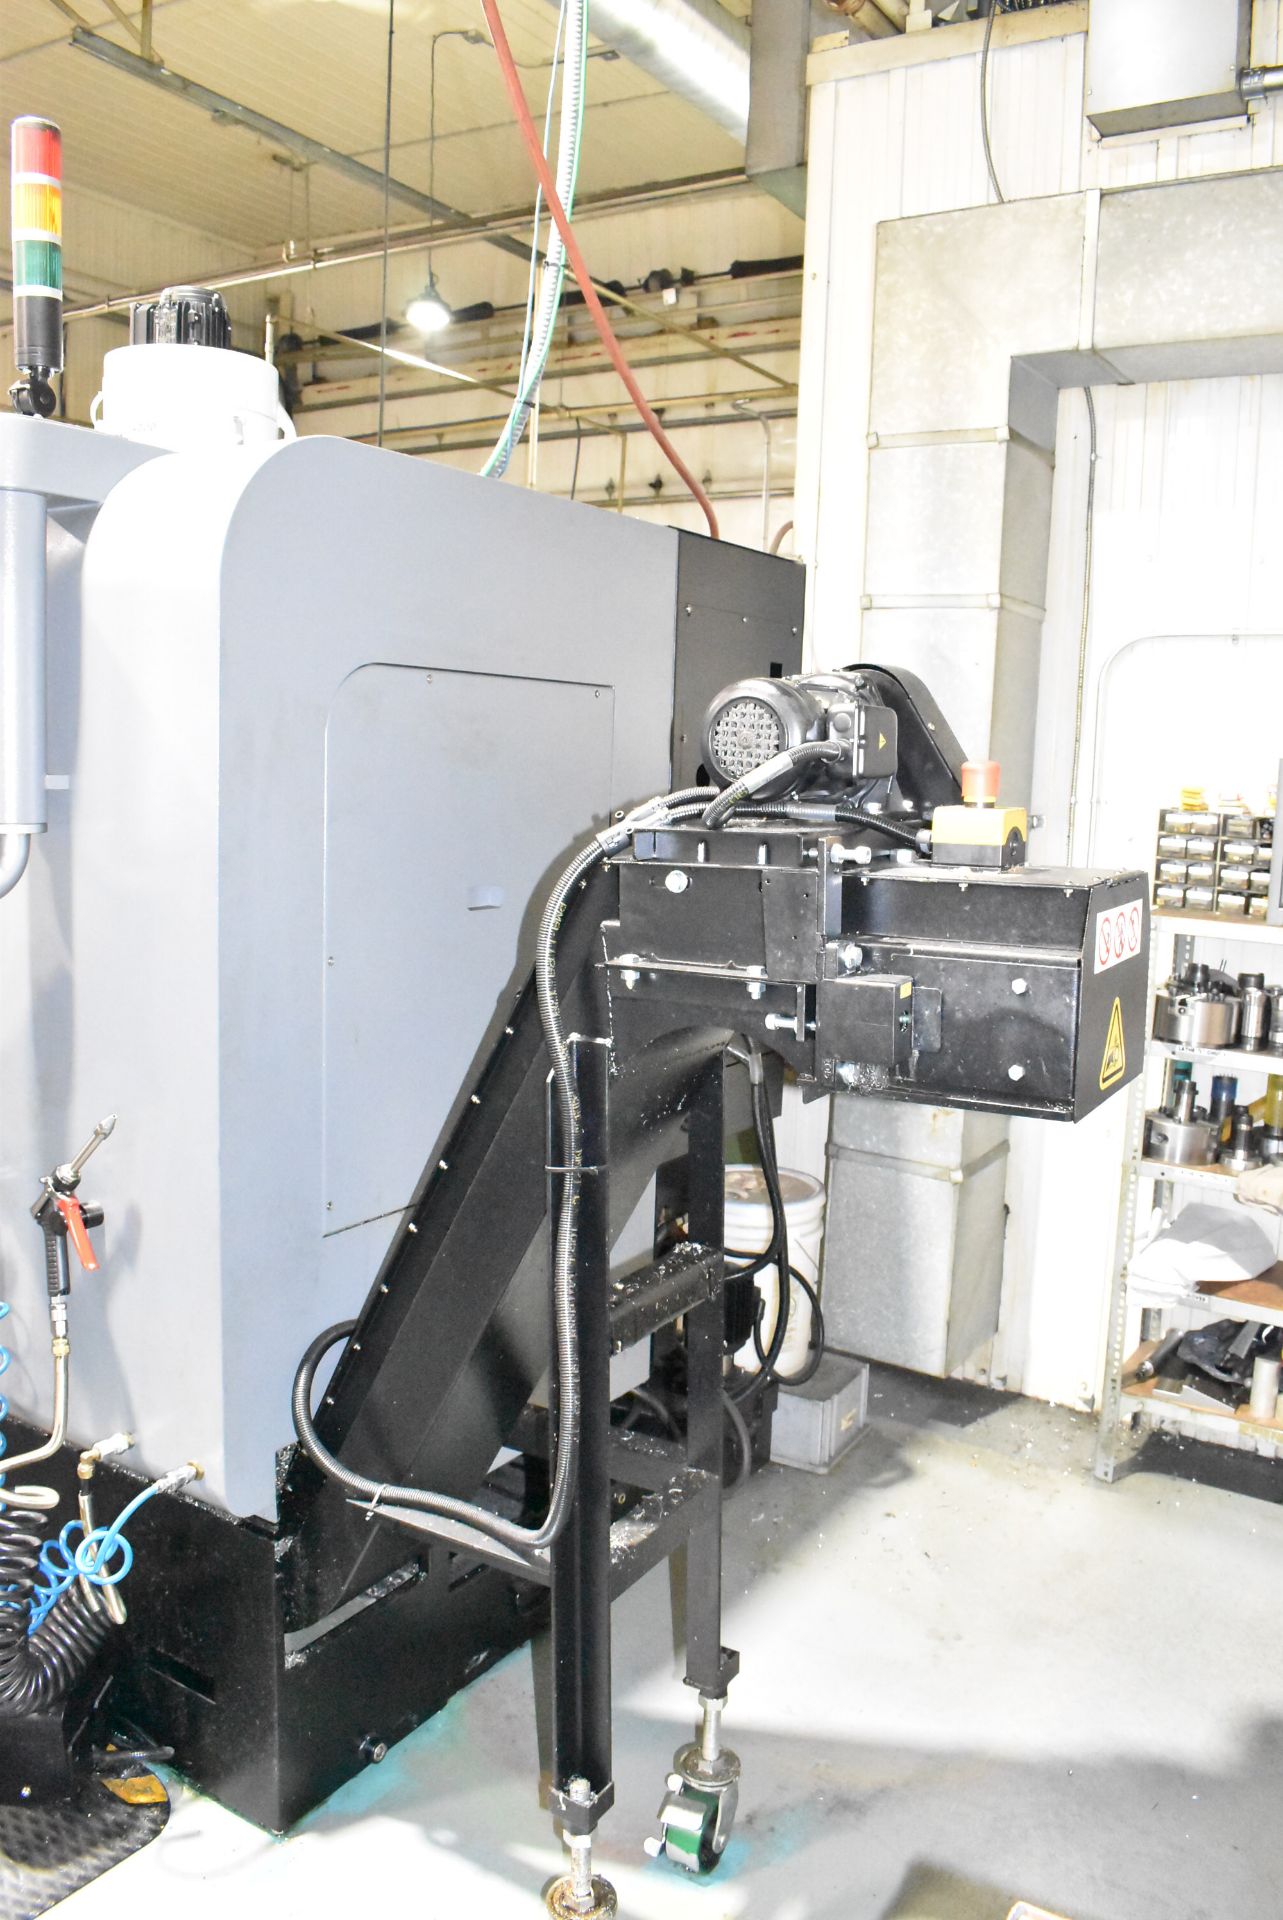 HURCO (INSTALLED NEW IN 2018) TM6I CNC TURNING CENTER WITH HURCO CNC CONTROL, 9" HYDRAULIC CHUCK, - Image 8 of 13